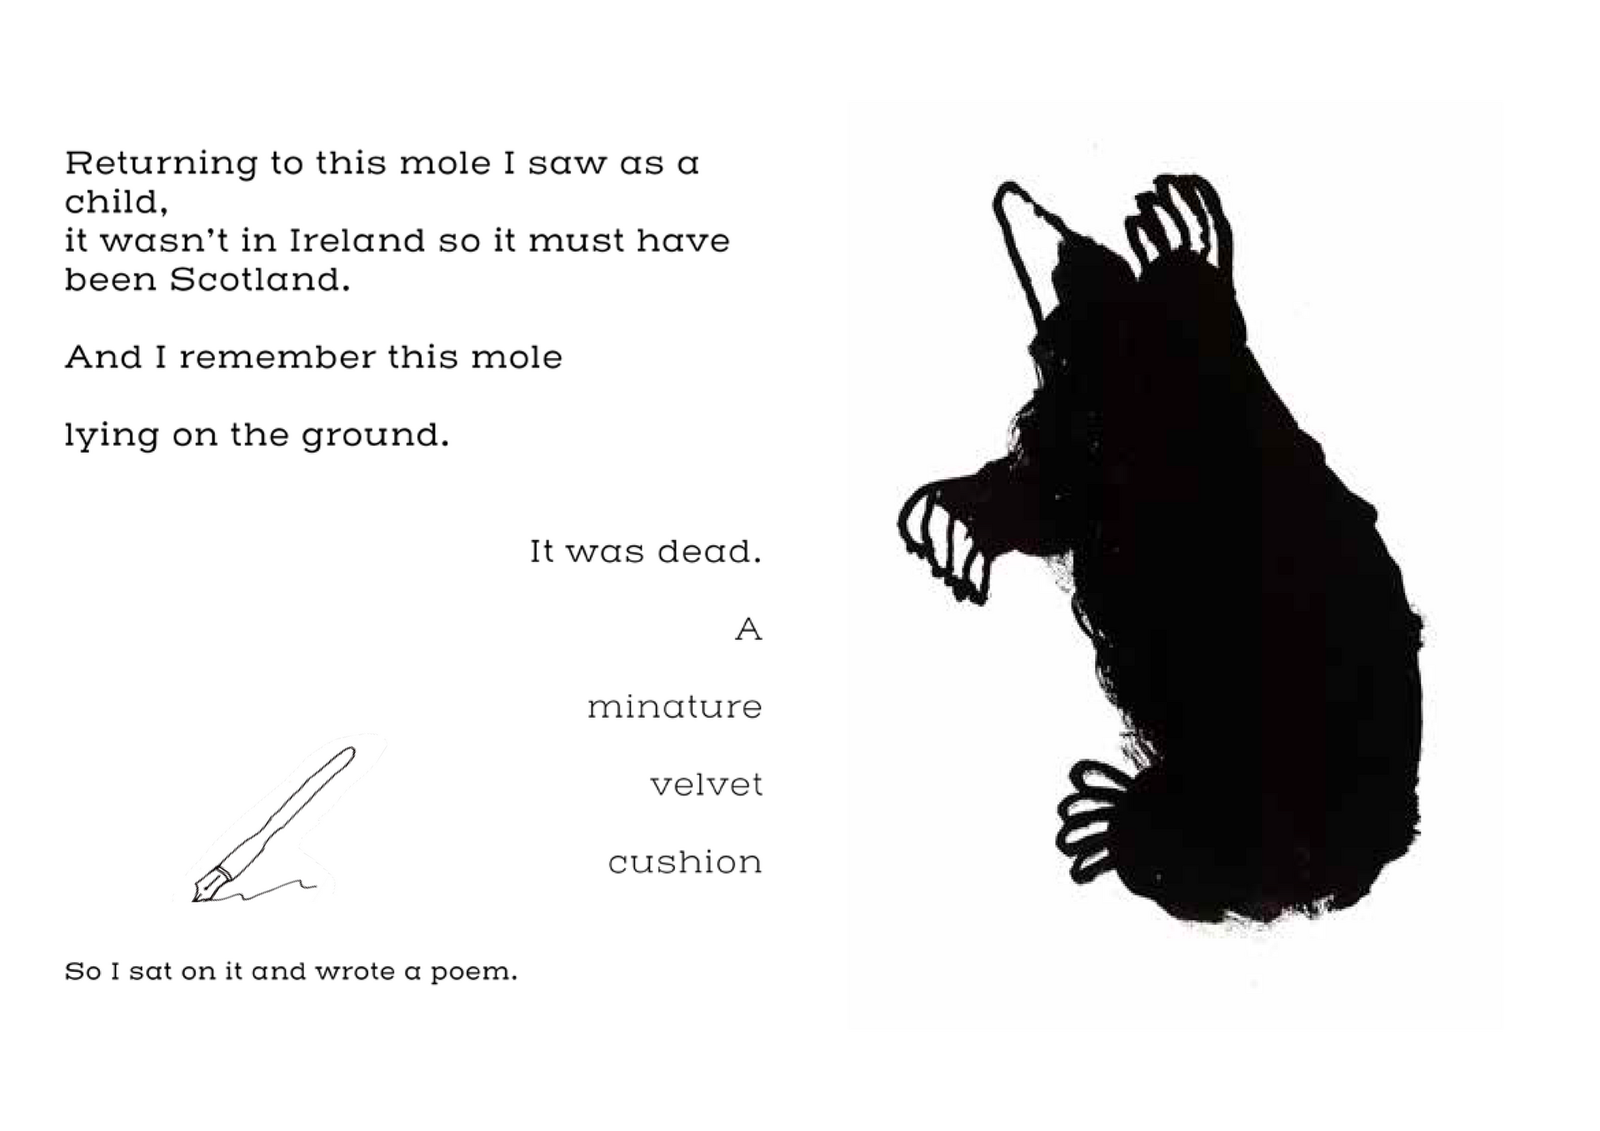 Page 6 of the mole zine, shows writing below and ink drawing of a quill, and a mole